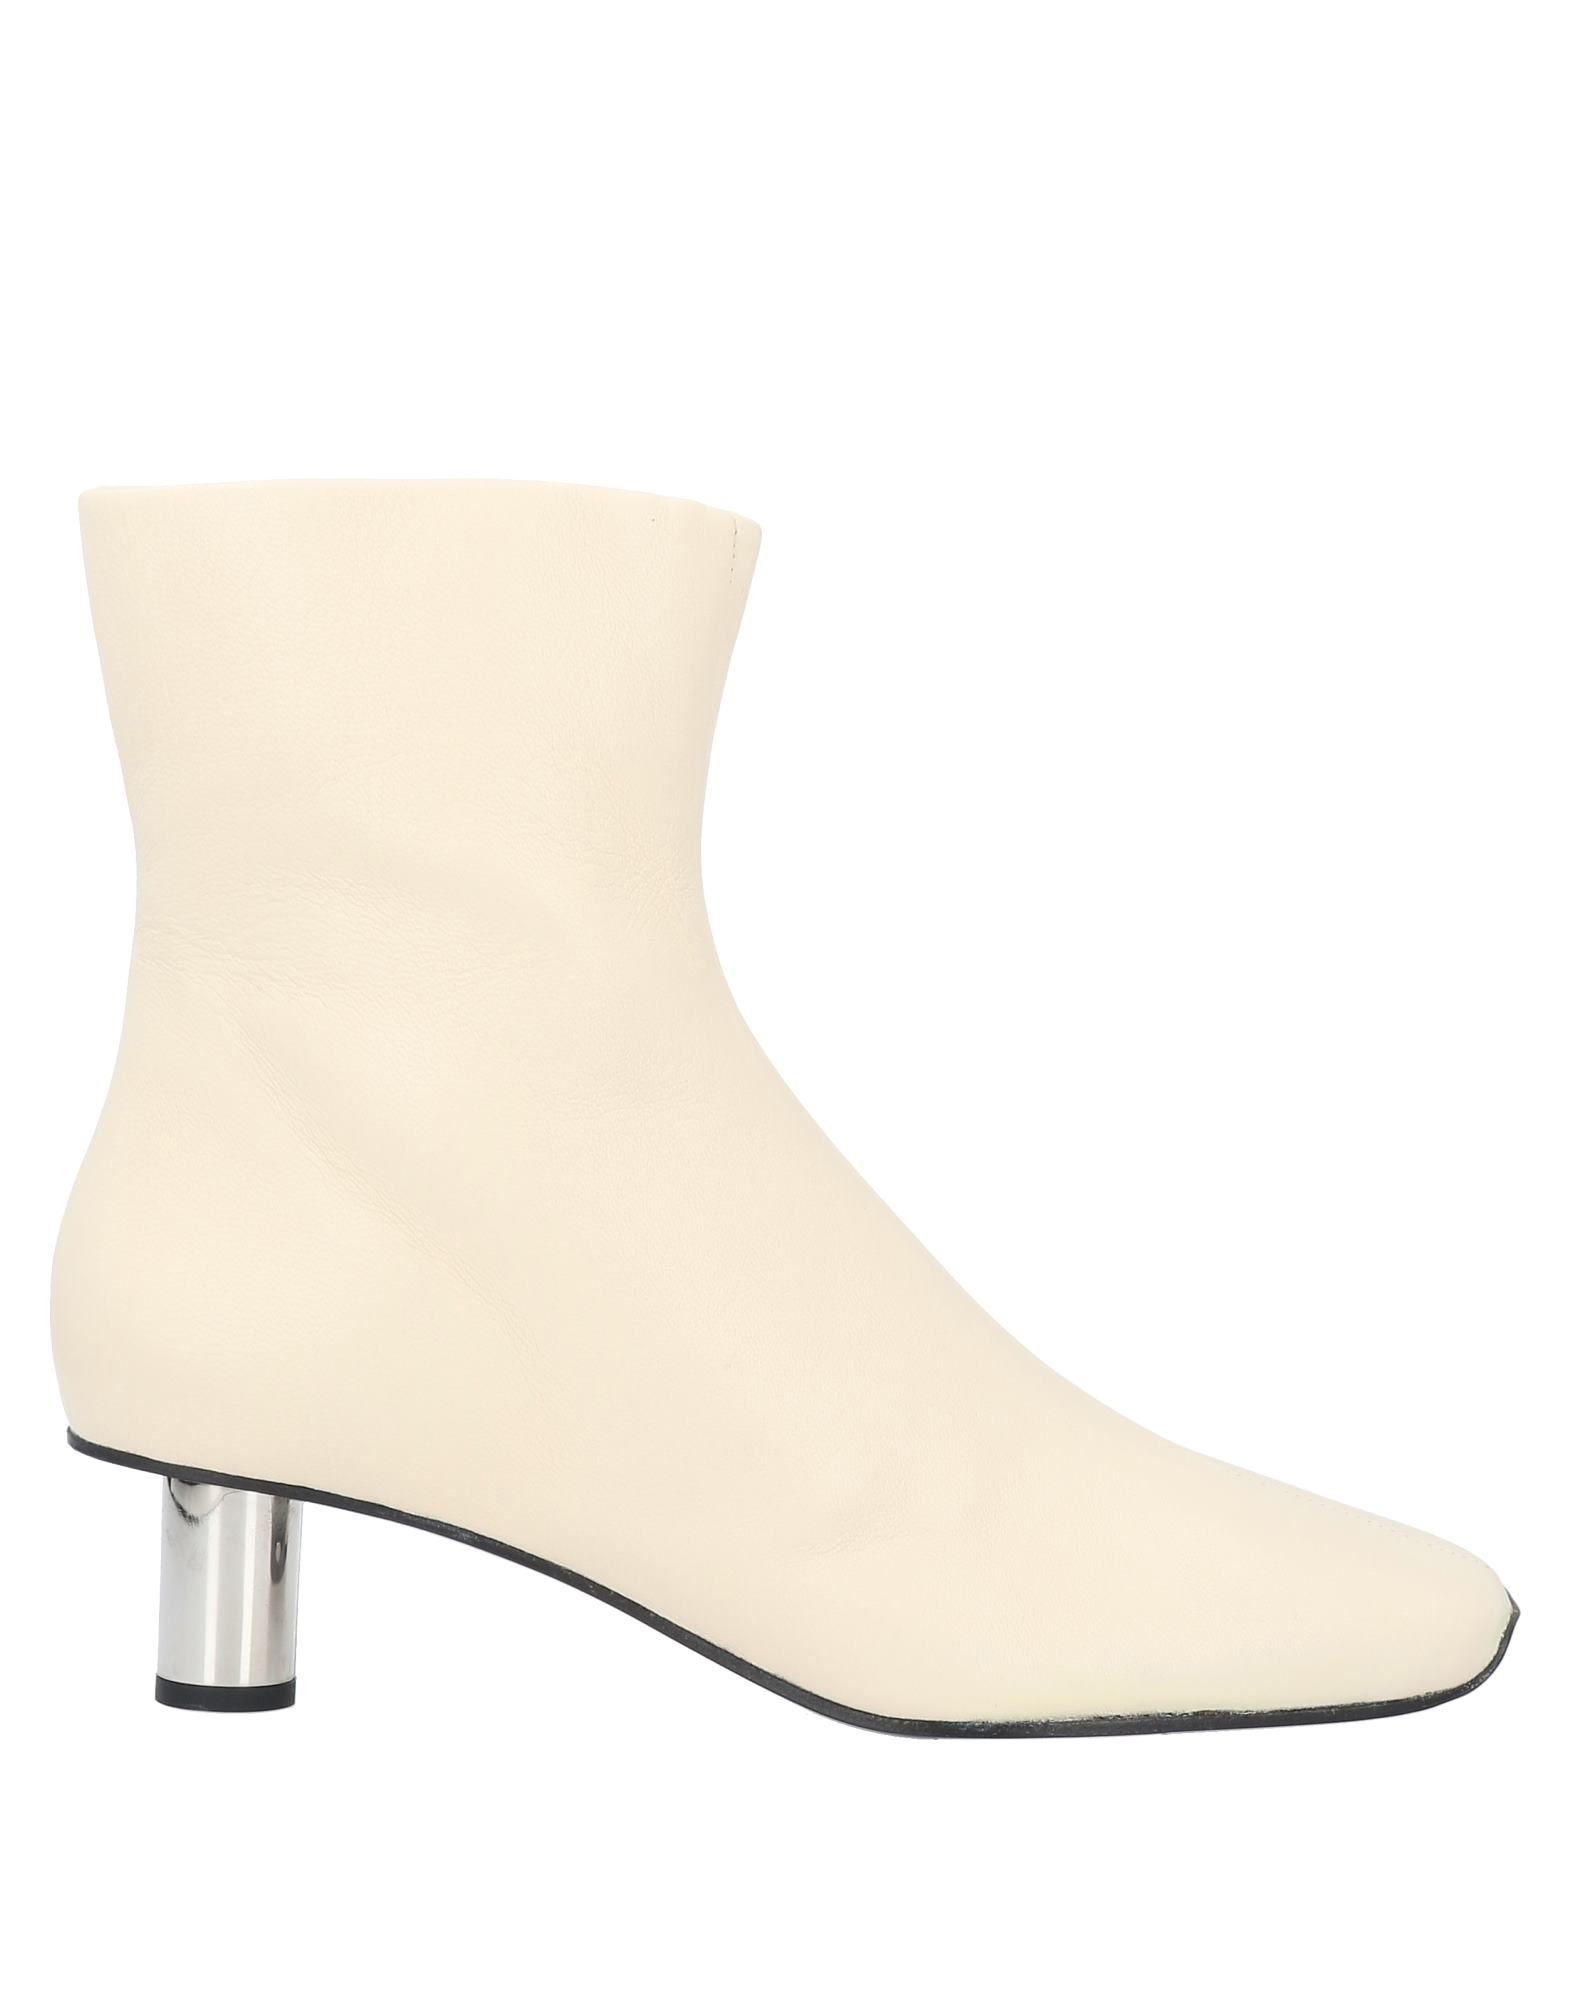 Proenza Schouler Ankle Boots In Ivory